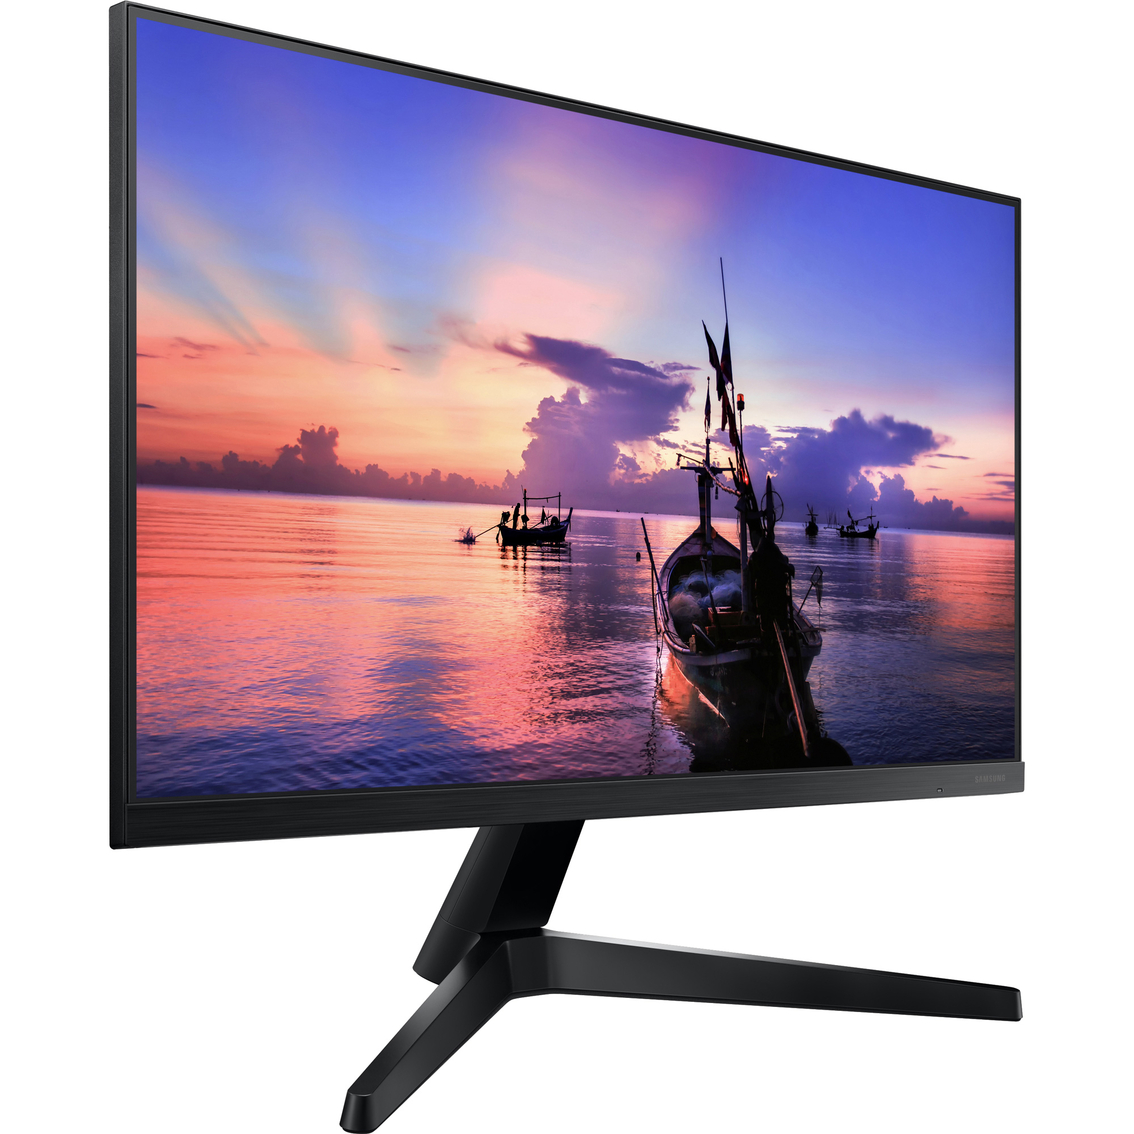 Samsung 24 in. LED Computer Monitor LF24T350FHNXZA - Image 2 of 2